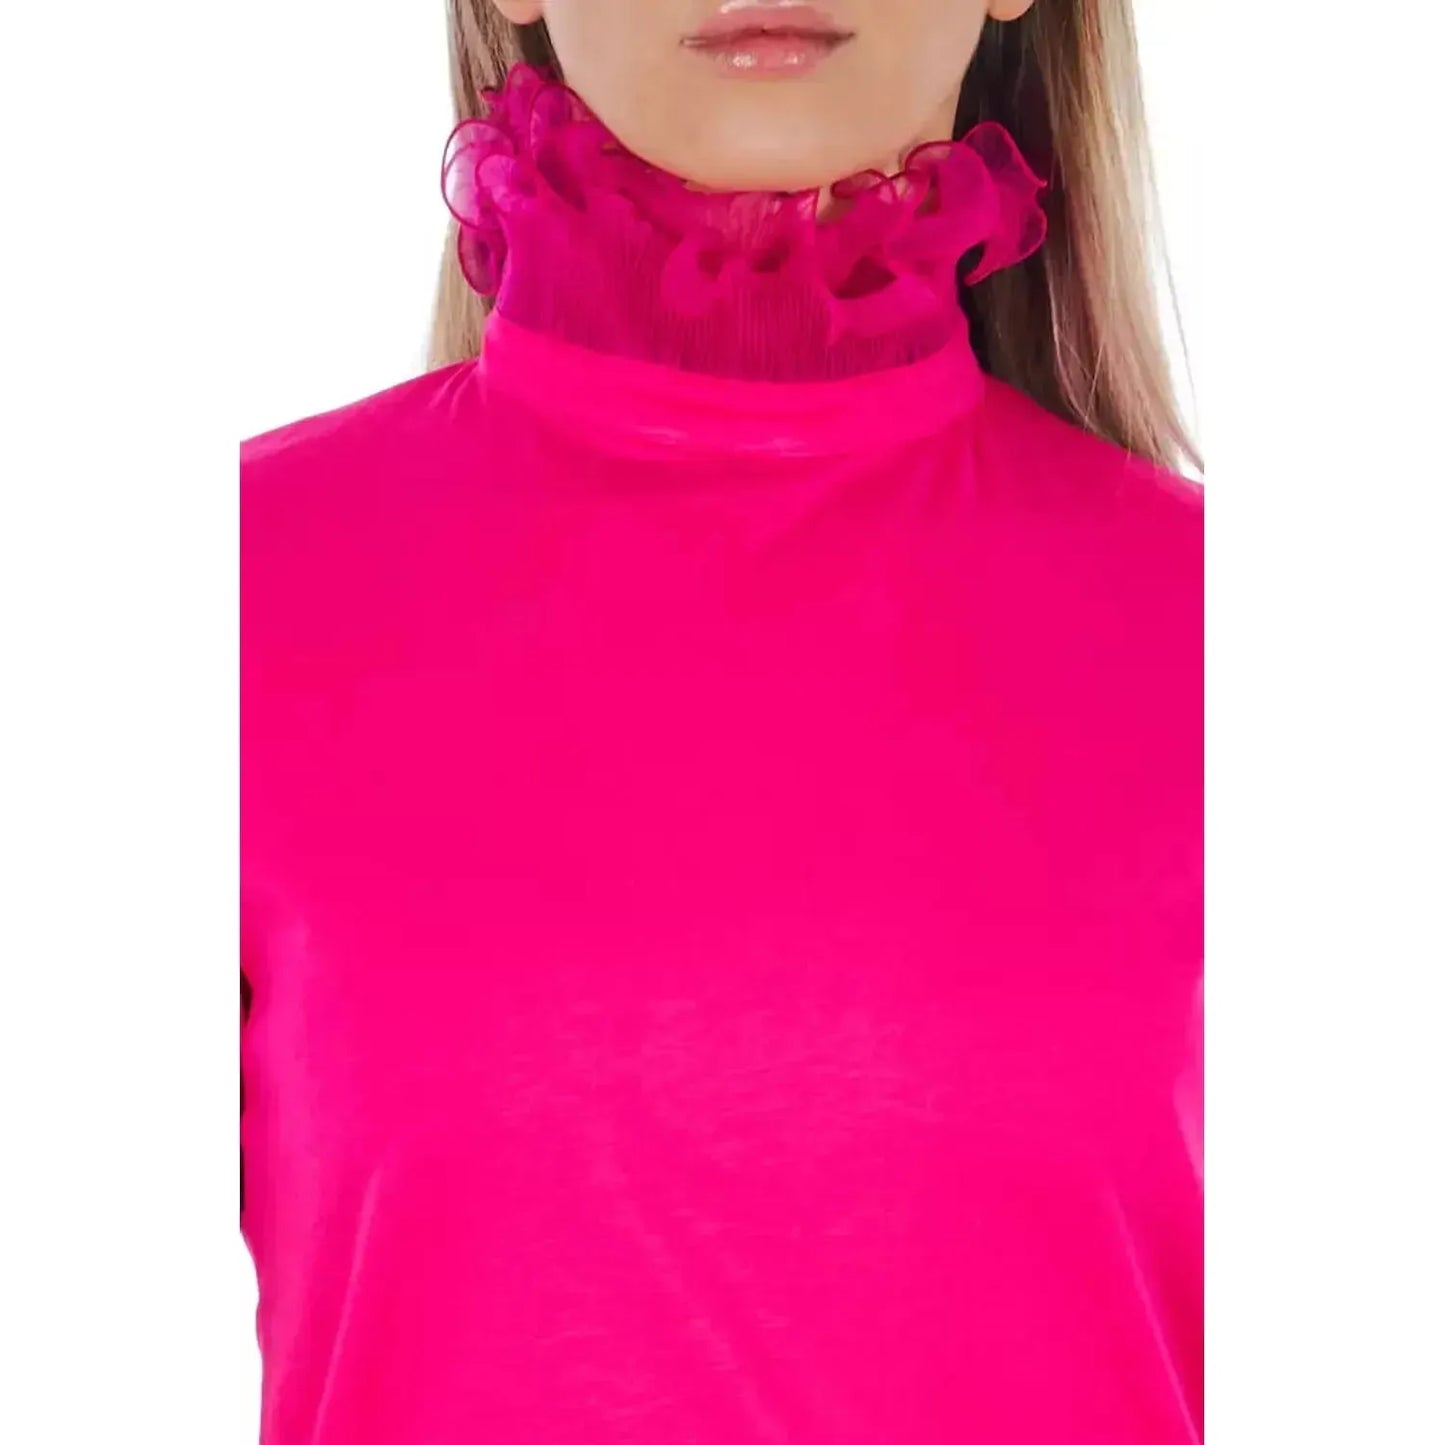 Frankie Morello Chic Pink Lace-Back High Neck Tee proseviolet-tops-t-shirt-2 product-21717-1079580166-21-d30651f8-738.webp